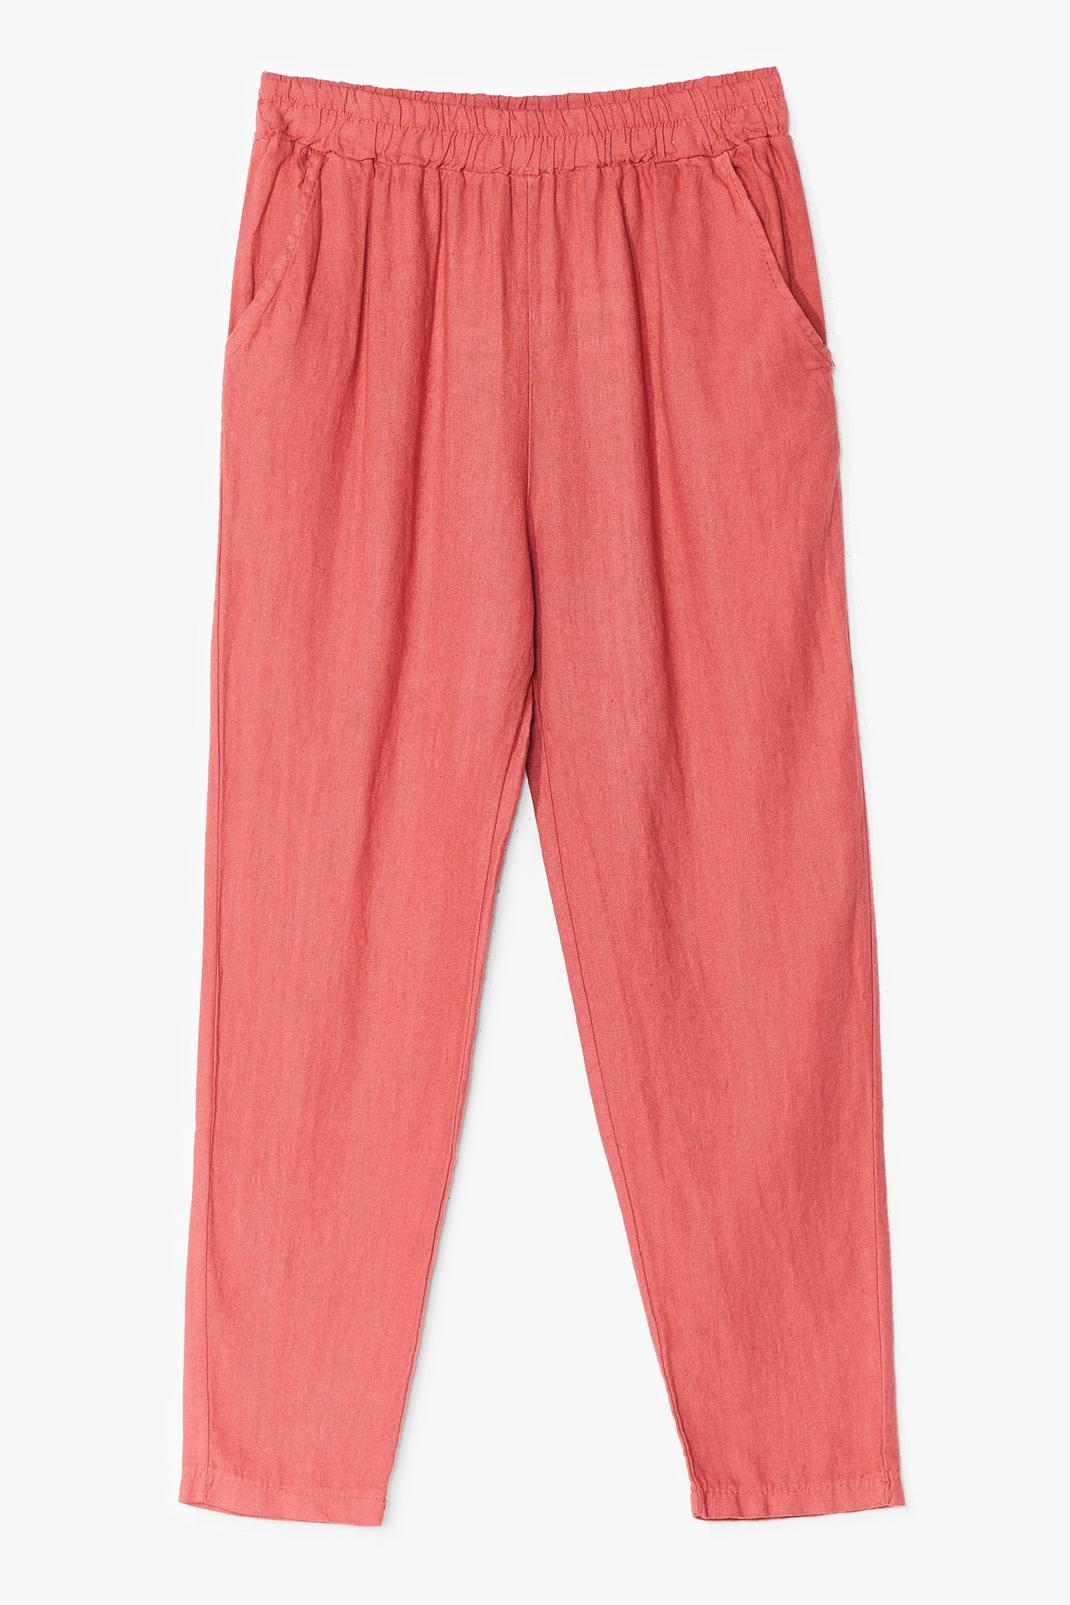 Coral Linen Tapered High Waisted Pants image number 1